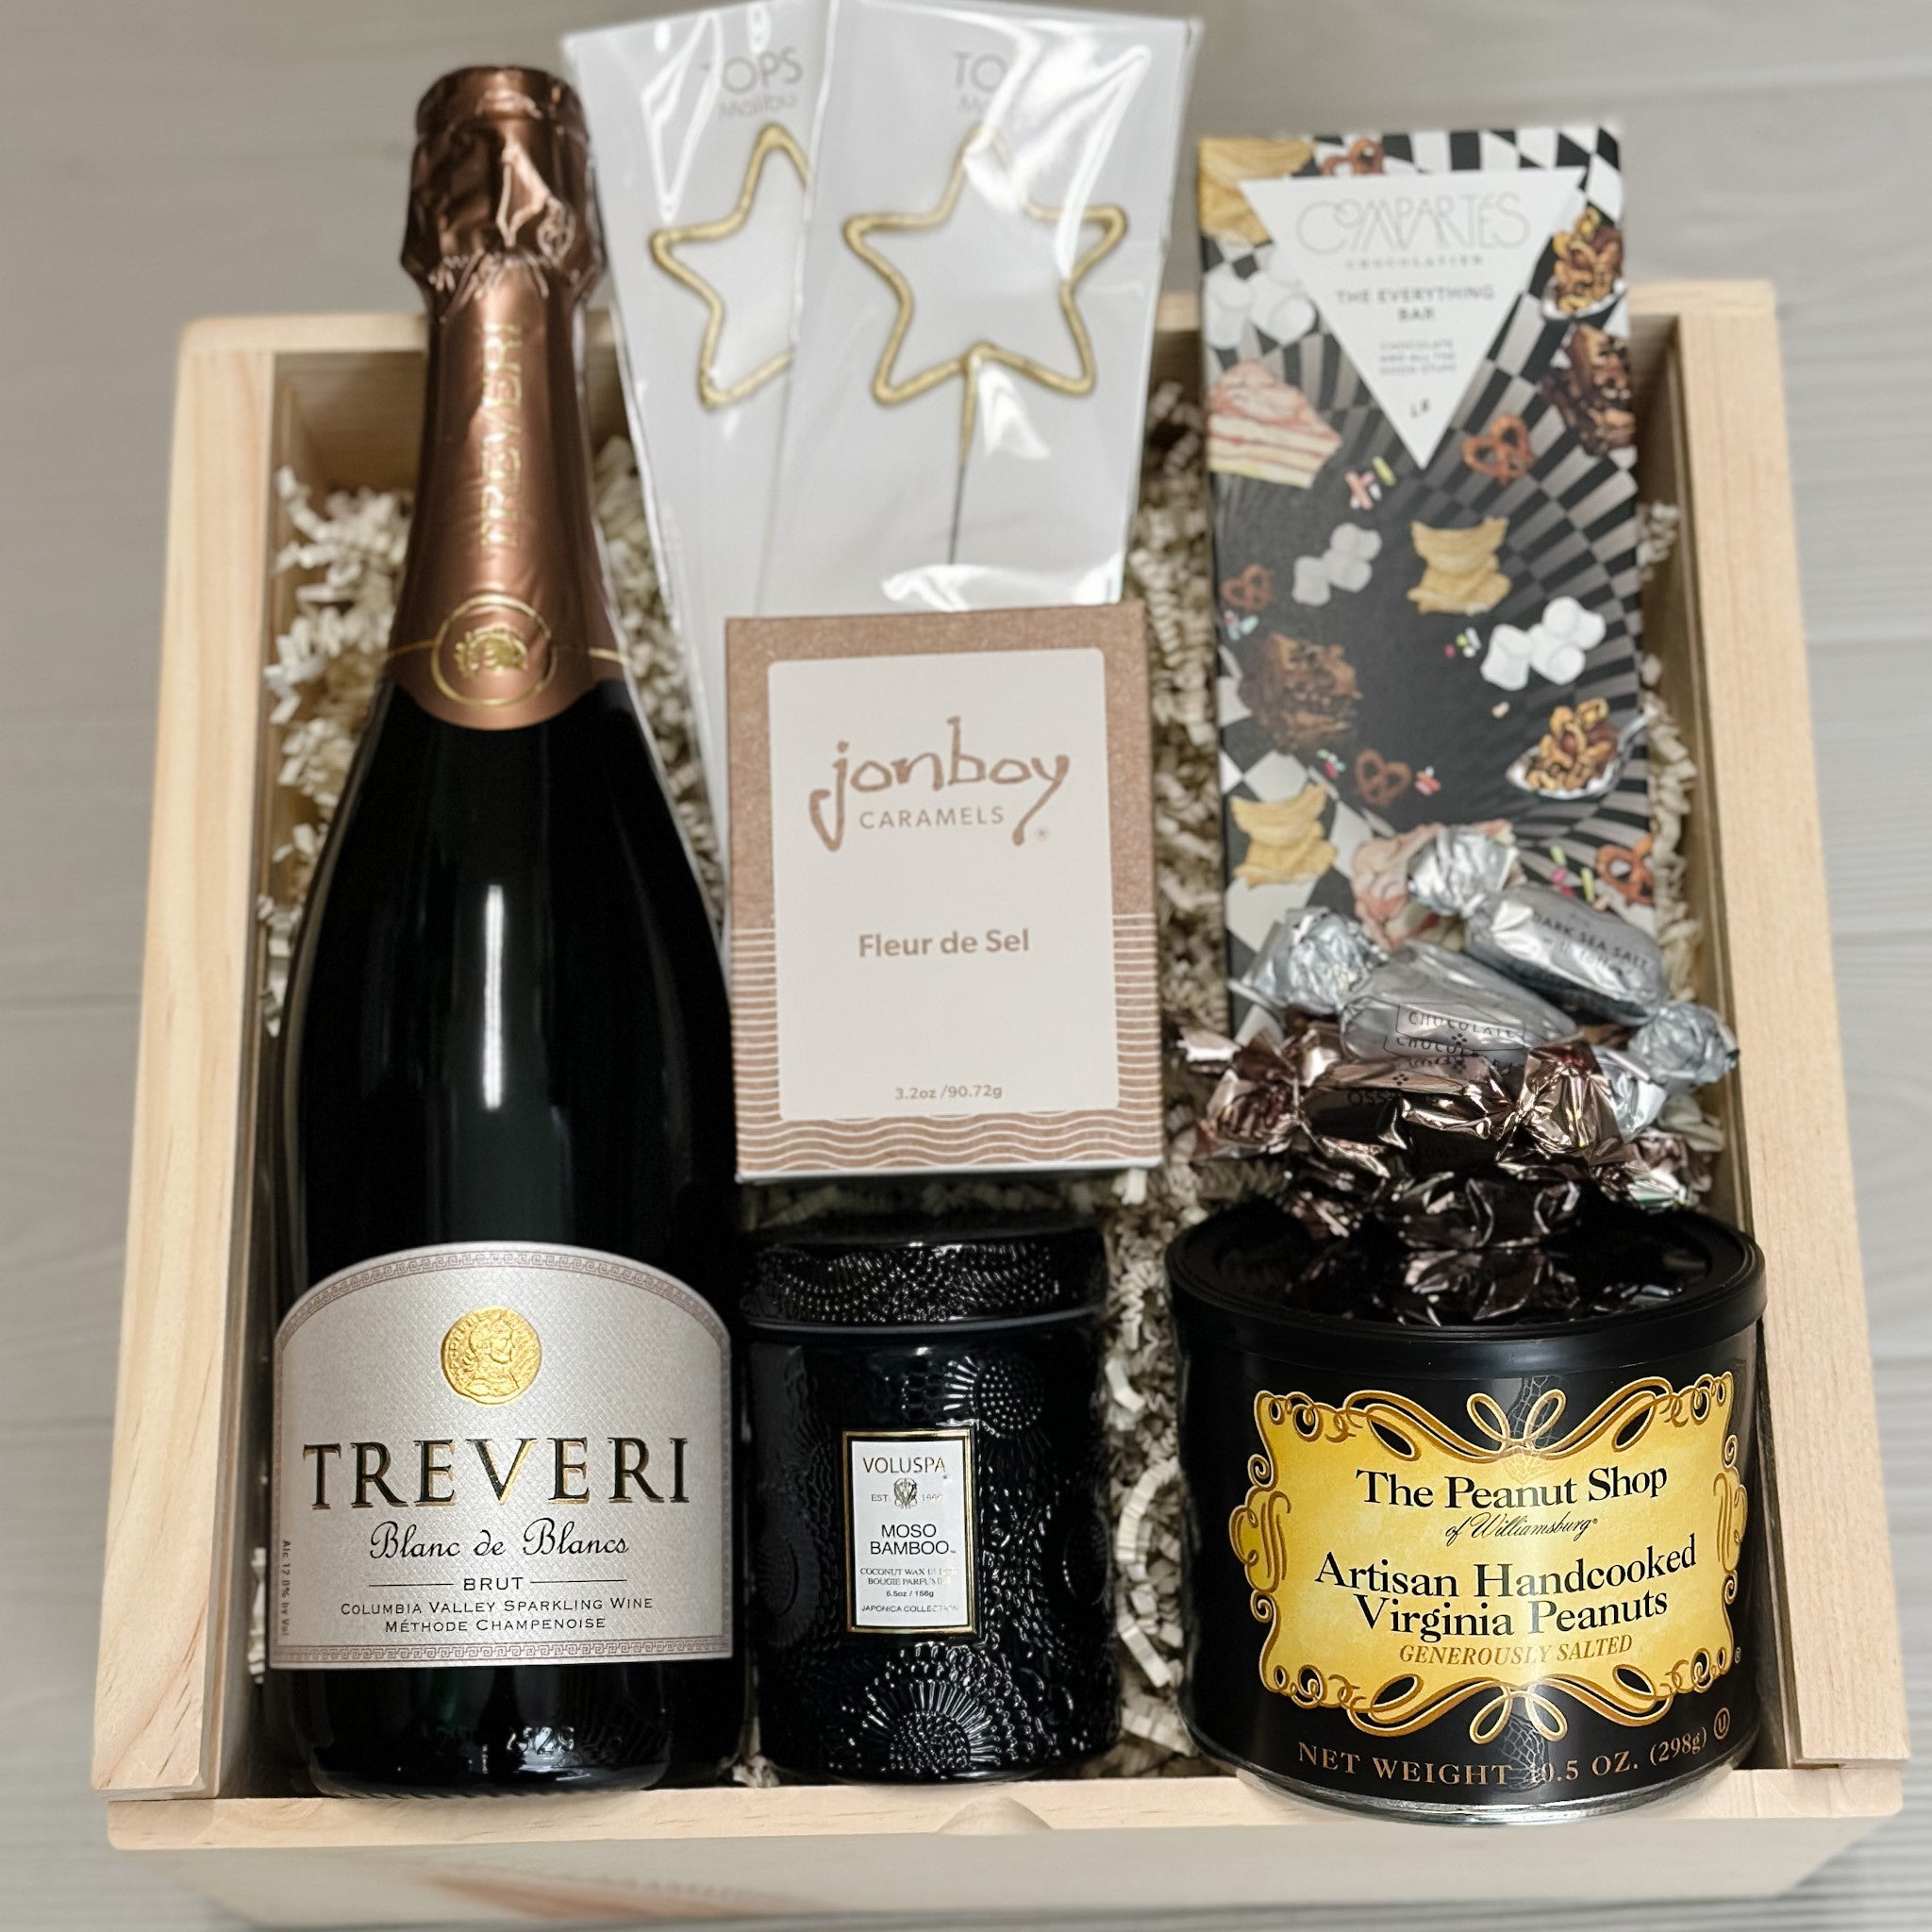 champagne, sparklers, chocolate, caramel, scented candle, peanuts included in our celebrate gift basket